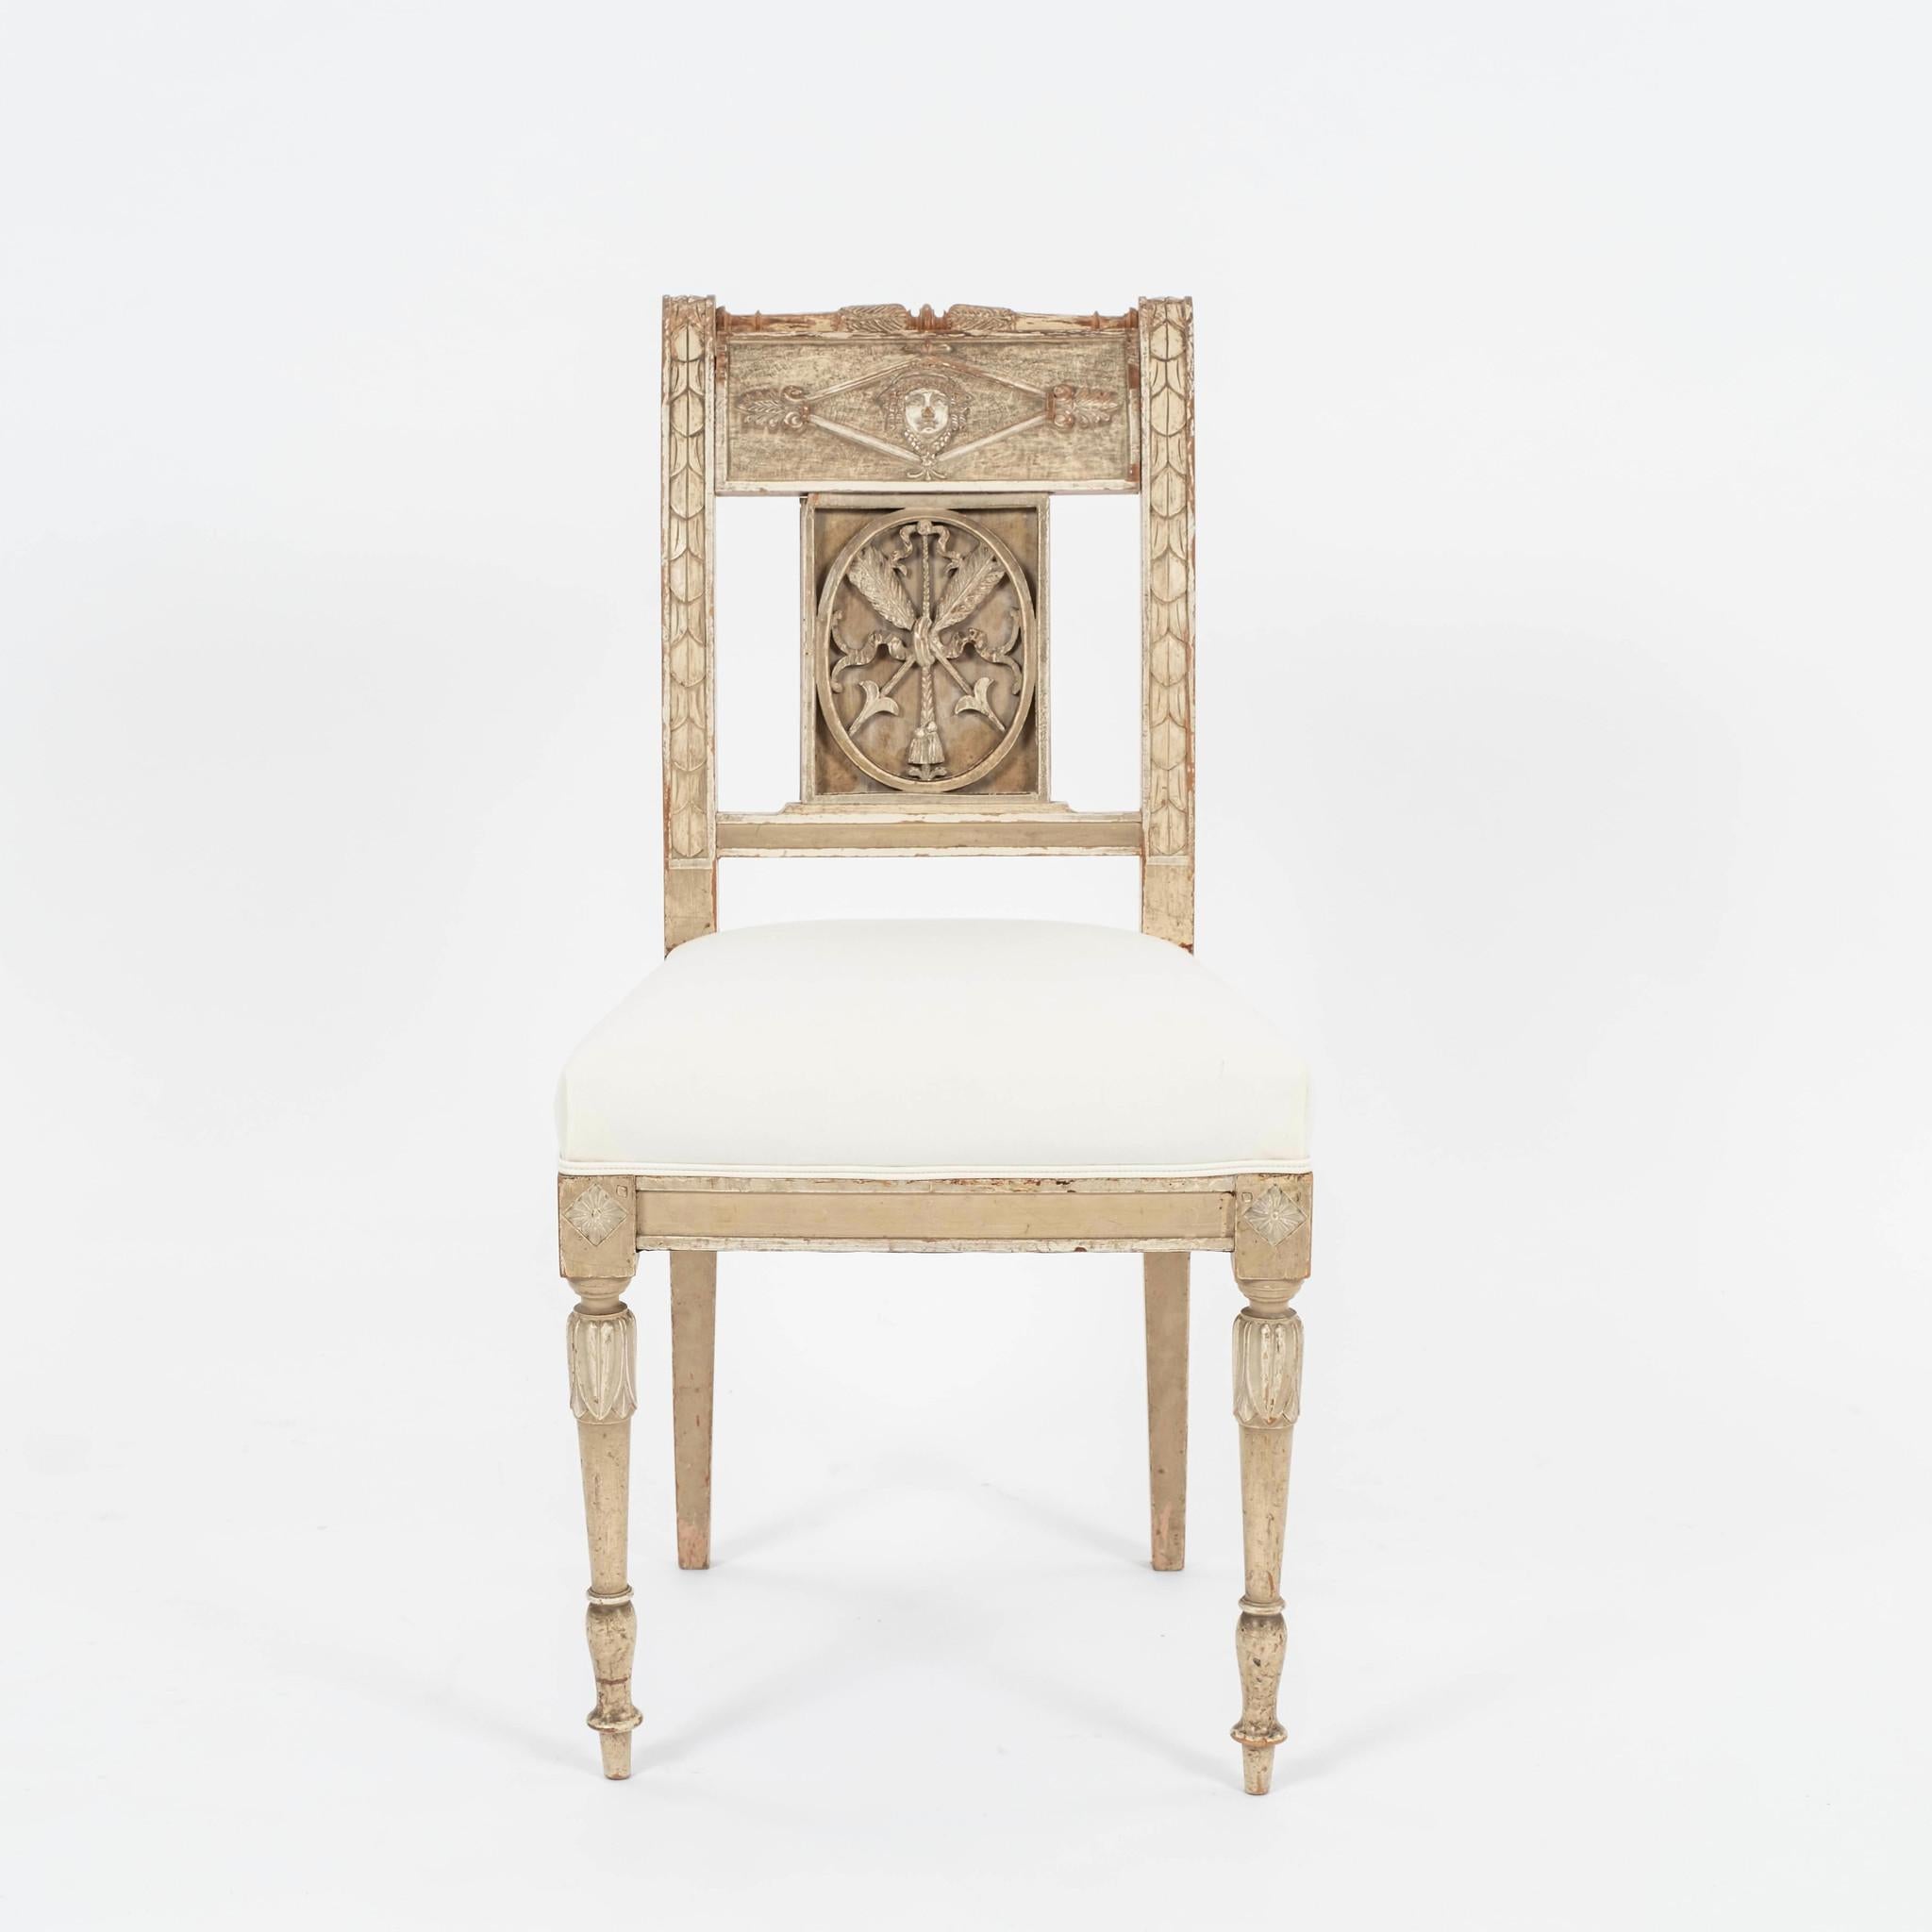 Set of four 18th Century Gustavian chairs: beautifully carved, scraped painted adorned with exceptional Neoclassical motif decoration. Newly upholstered in ticking.
Four available and also sold by the pair our other listing.